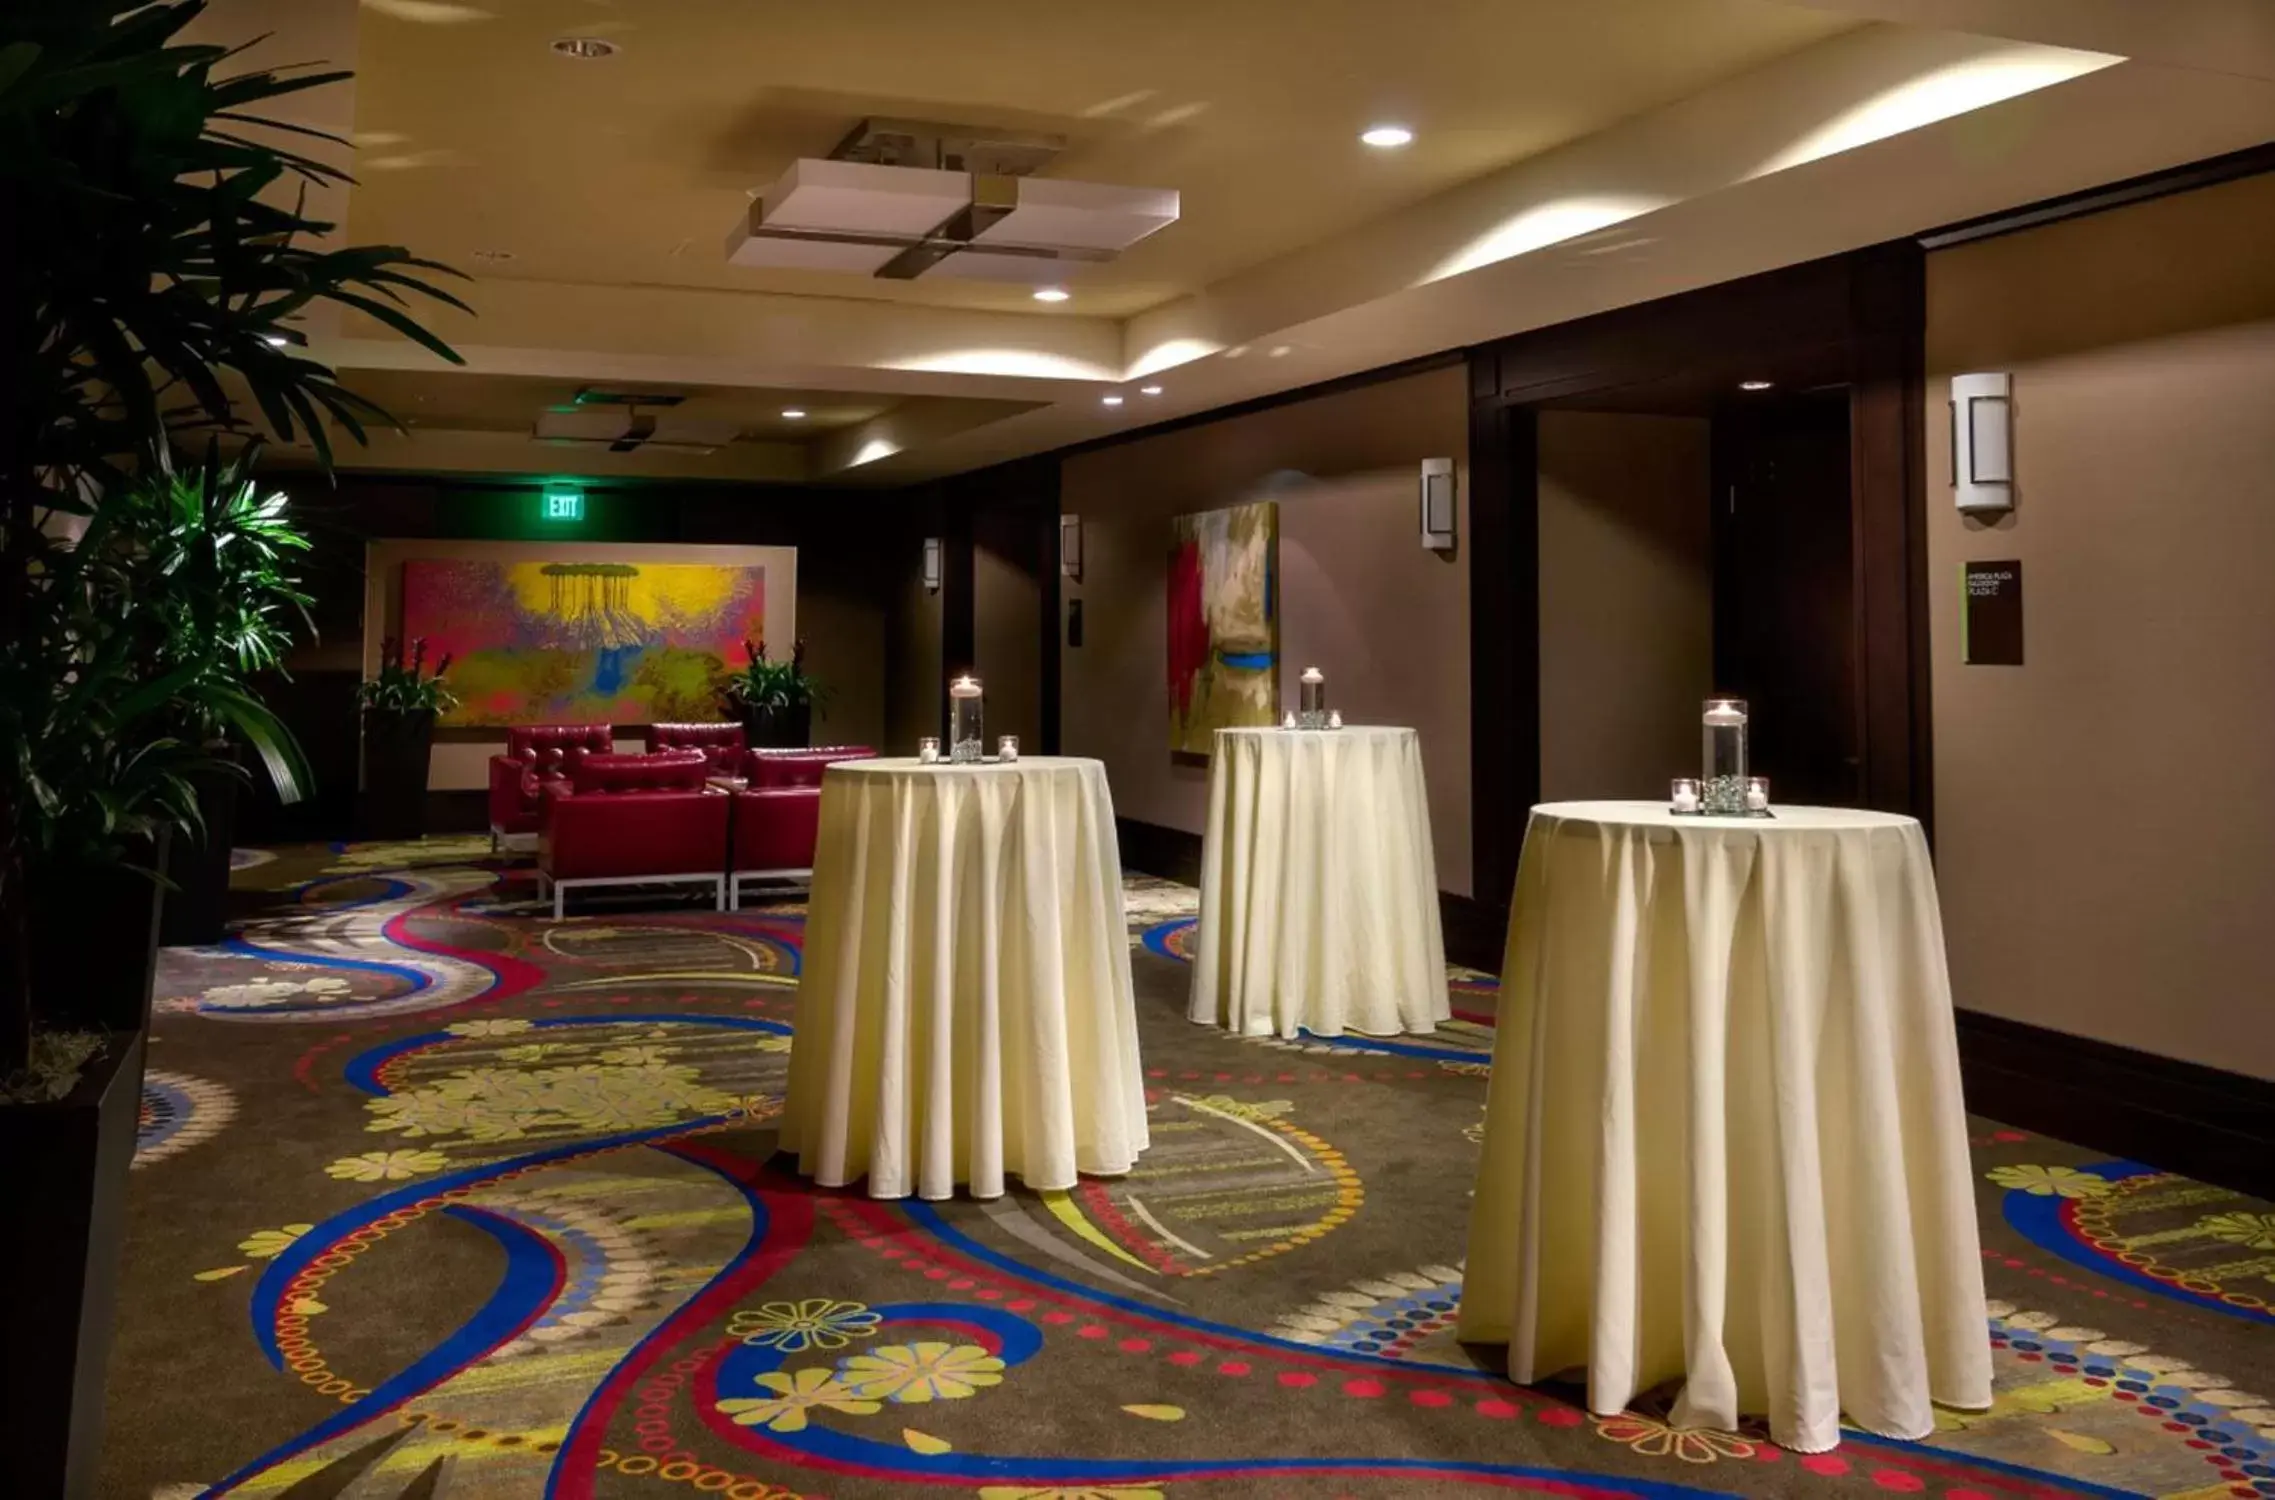 Meeting/conference room, Banquet Facilities in Hilton Garden Inn Houston NW America Plaza